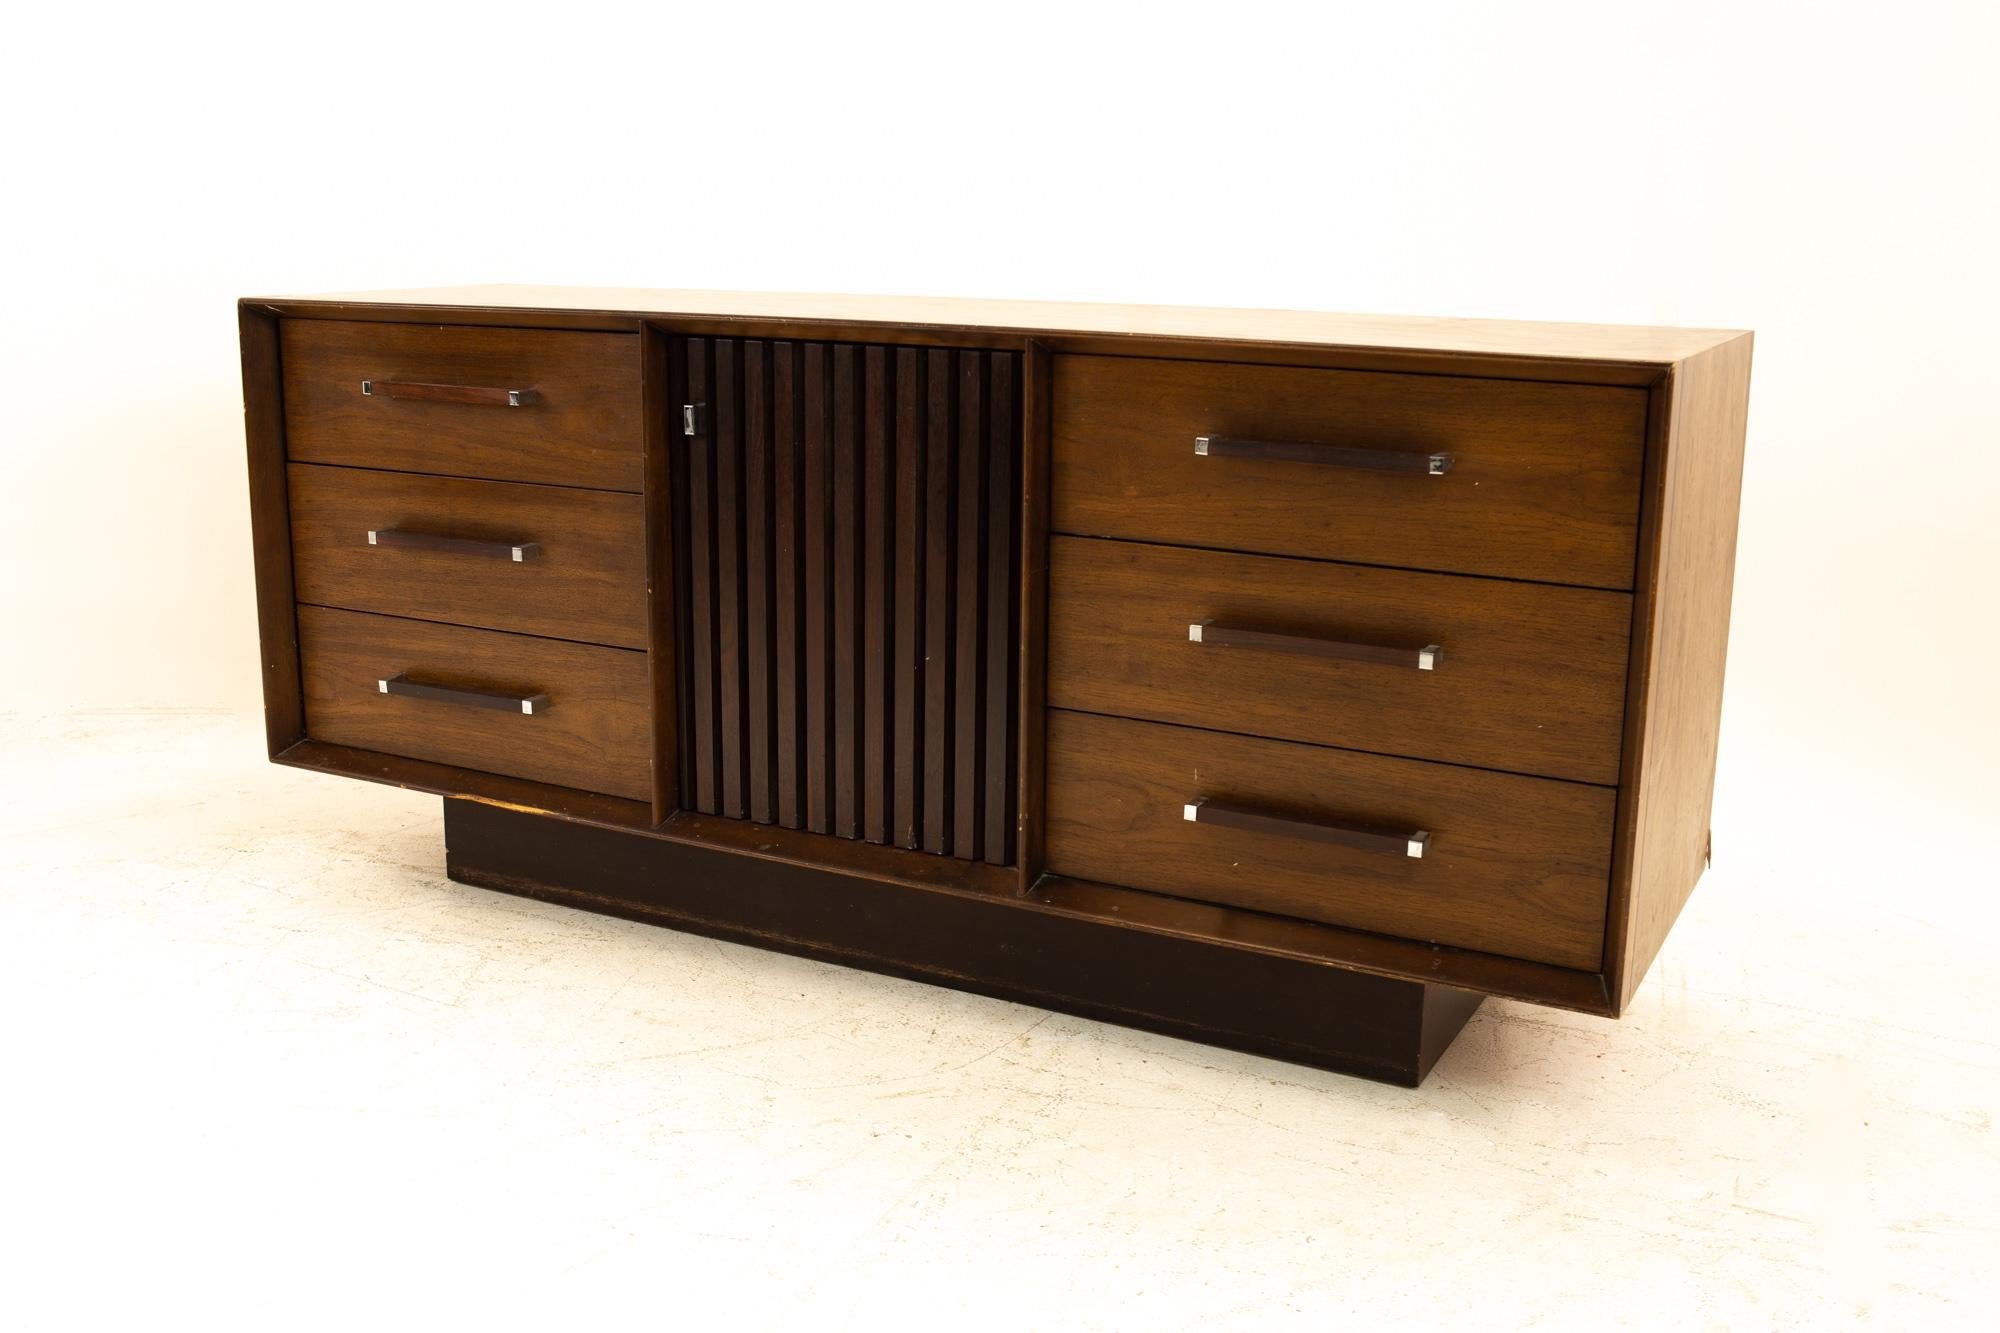 Lane Tower suite mid century walnut and rosewood lowboy
Dresser measures: 66.5 wide x 19 deep x 29.5 high

All pieces of furniture can be had in what we call restored vintage condition. That means the piece is restored upon purchase so it’s free